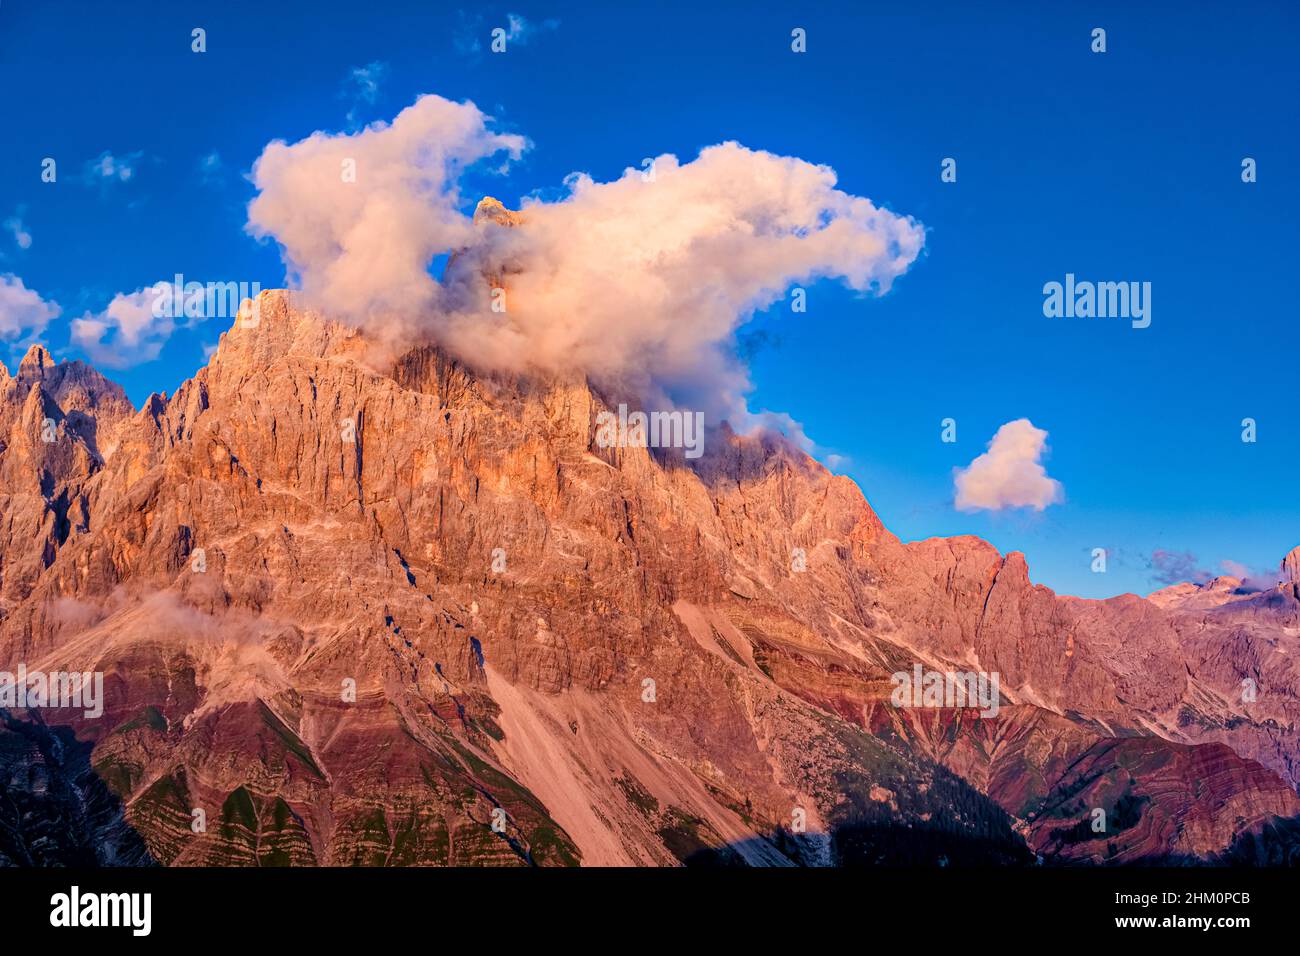 Summit and west face of Cimon della Pala, one of the main summits of the Pala group, covered in clouds, seen from above Rolle Pass at sunset. Stock Photo